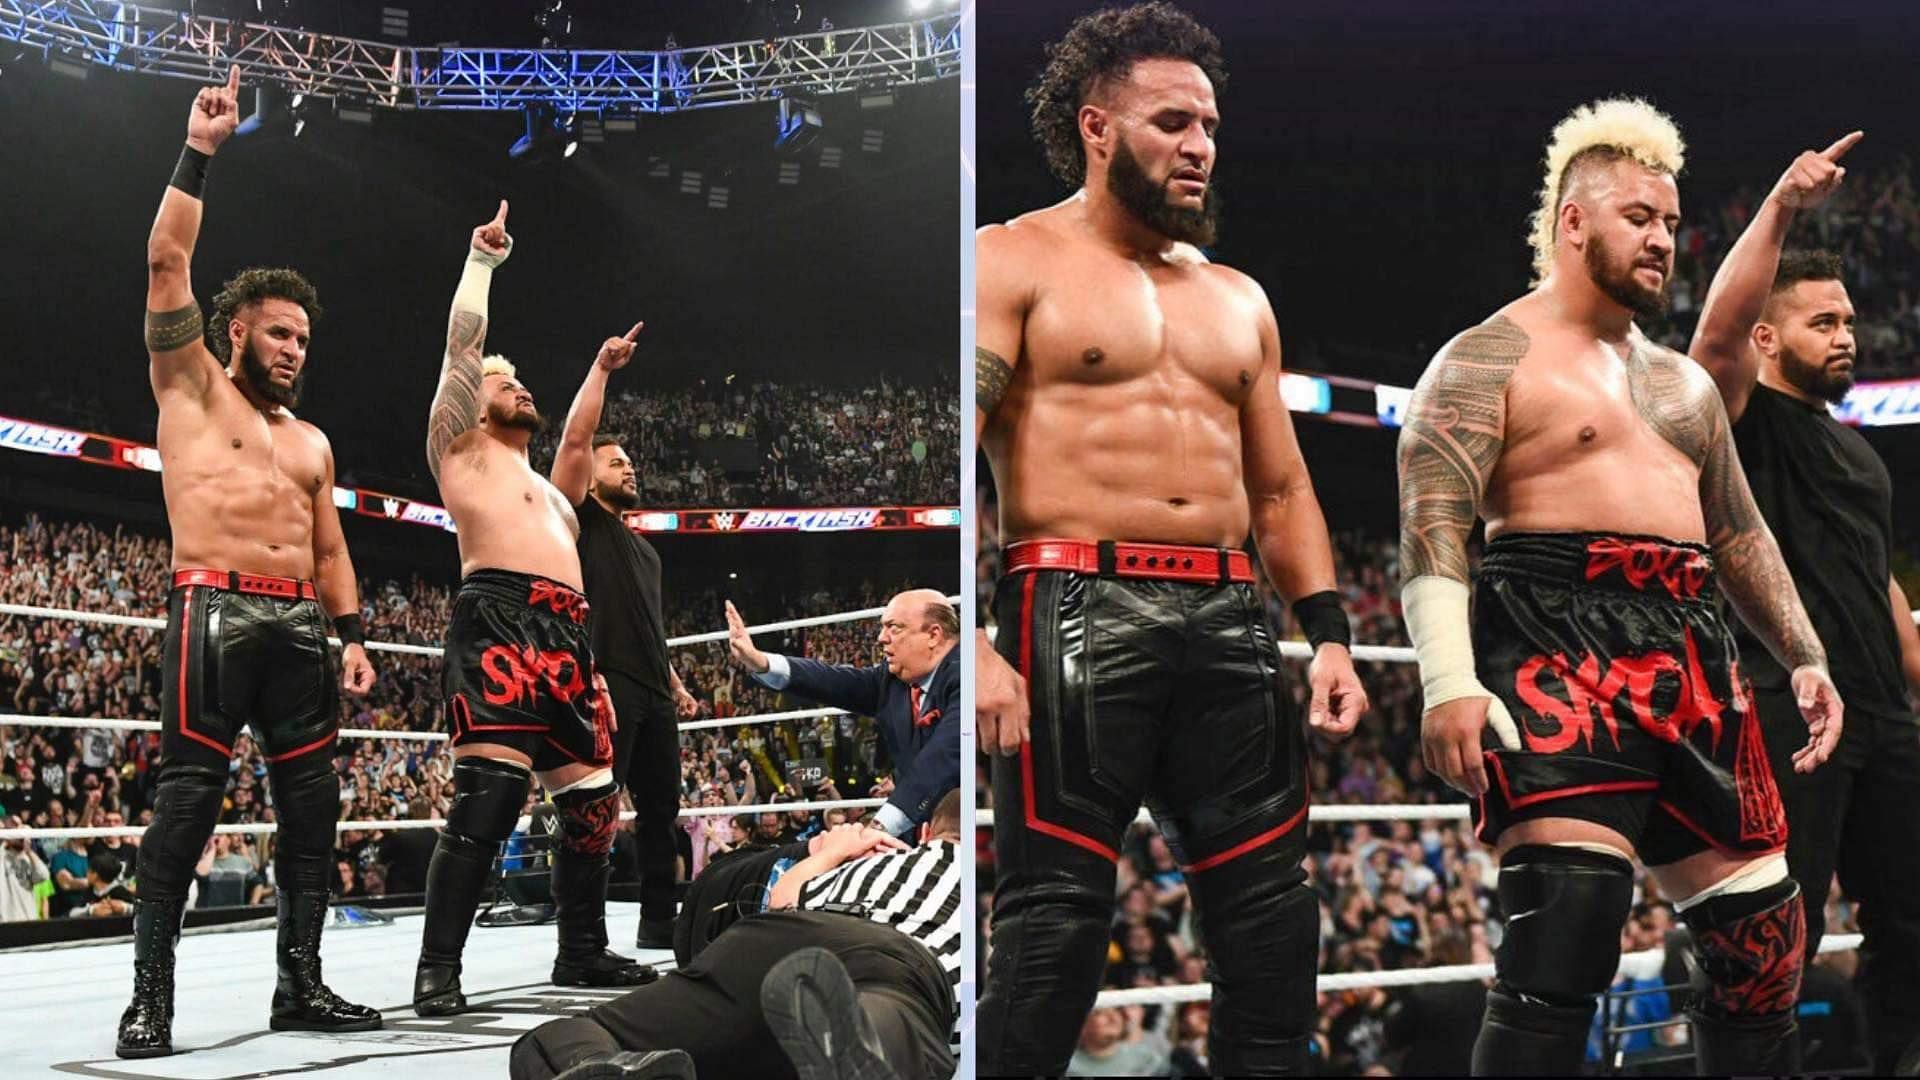 Newly recruited Bloodline members win first-ever tag team match in WWE